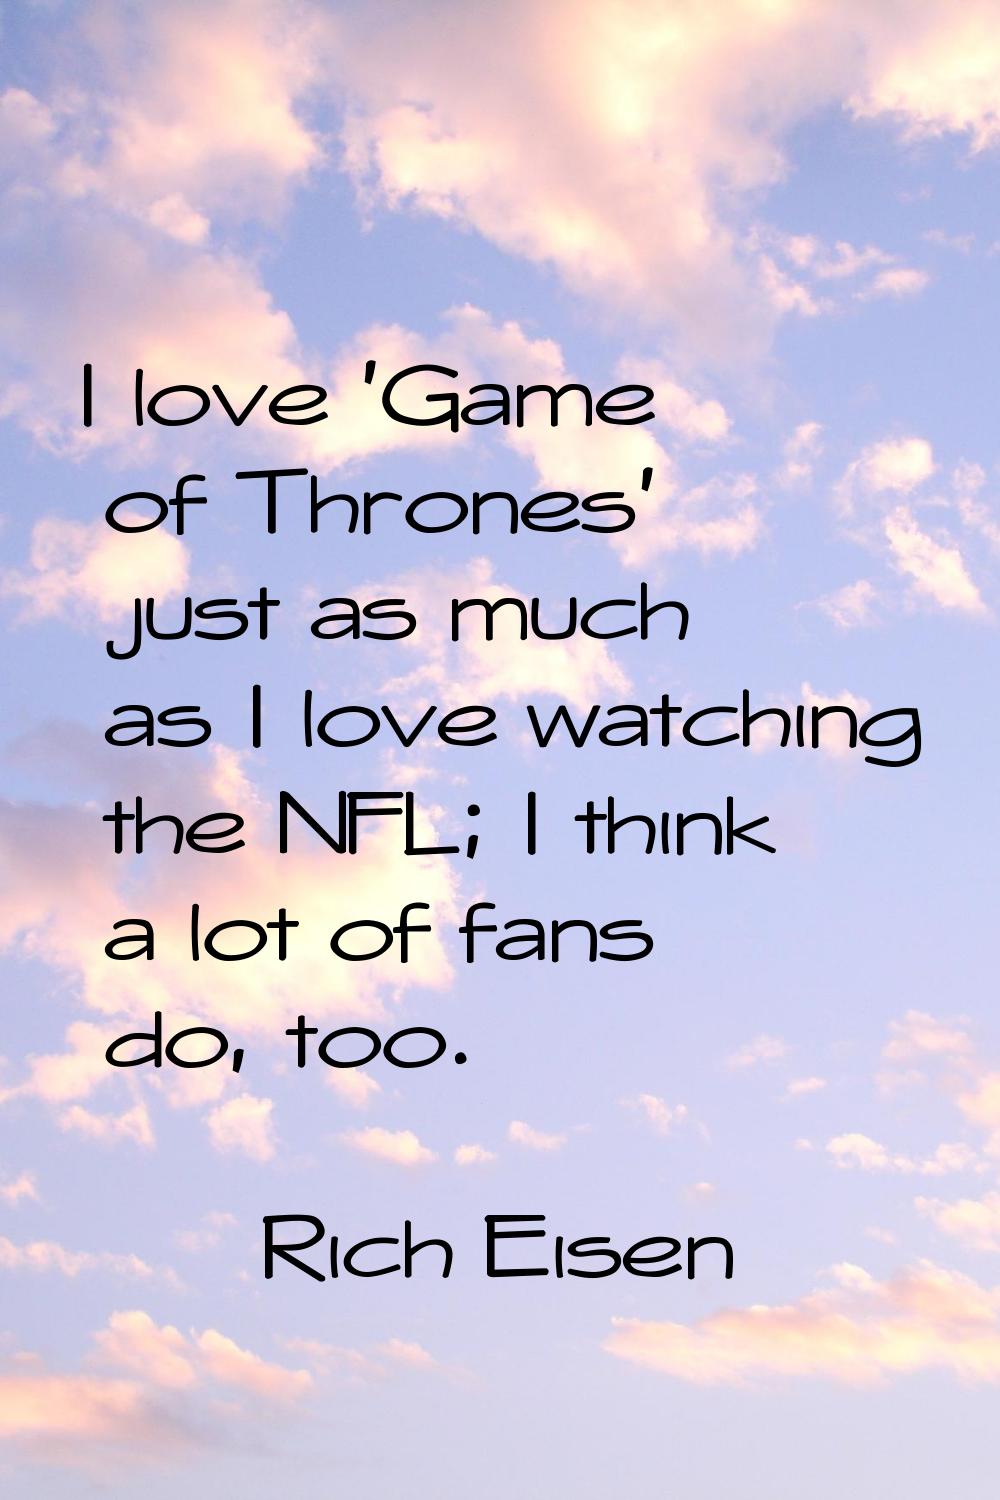 I love 'Game of Thrones' just as much as I love watching the NFL; I think a lot of fans do, too.